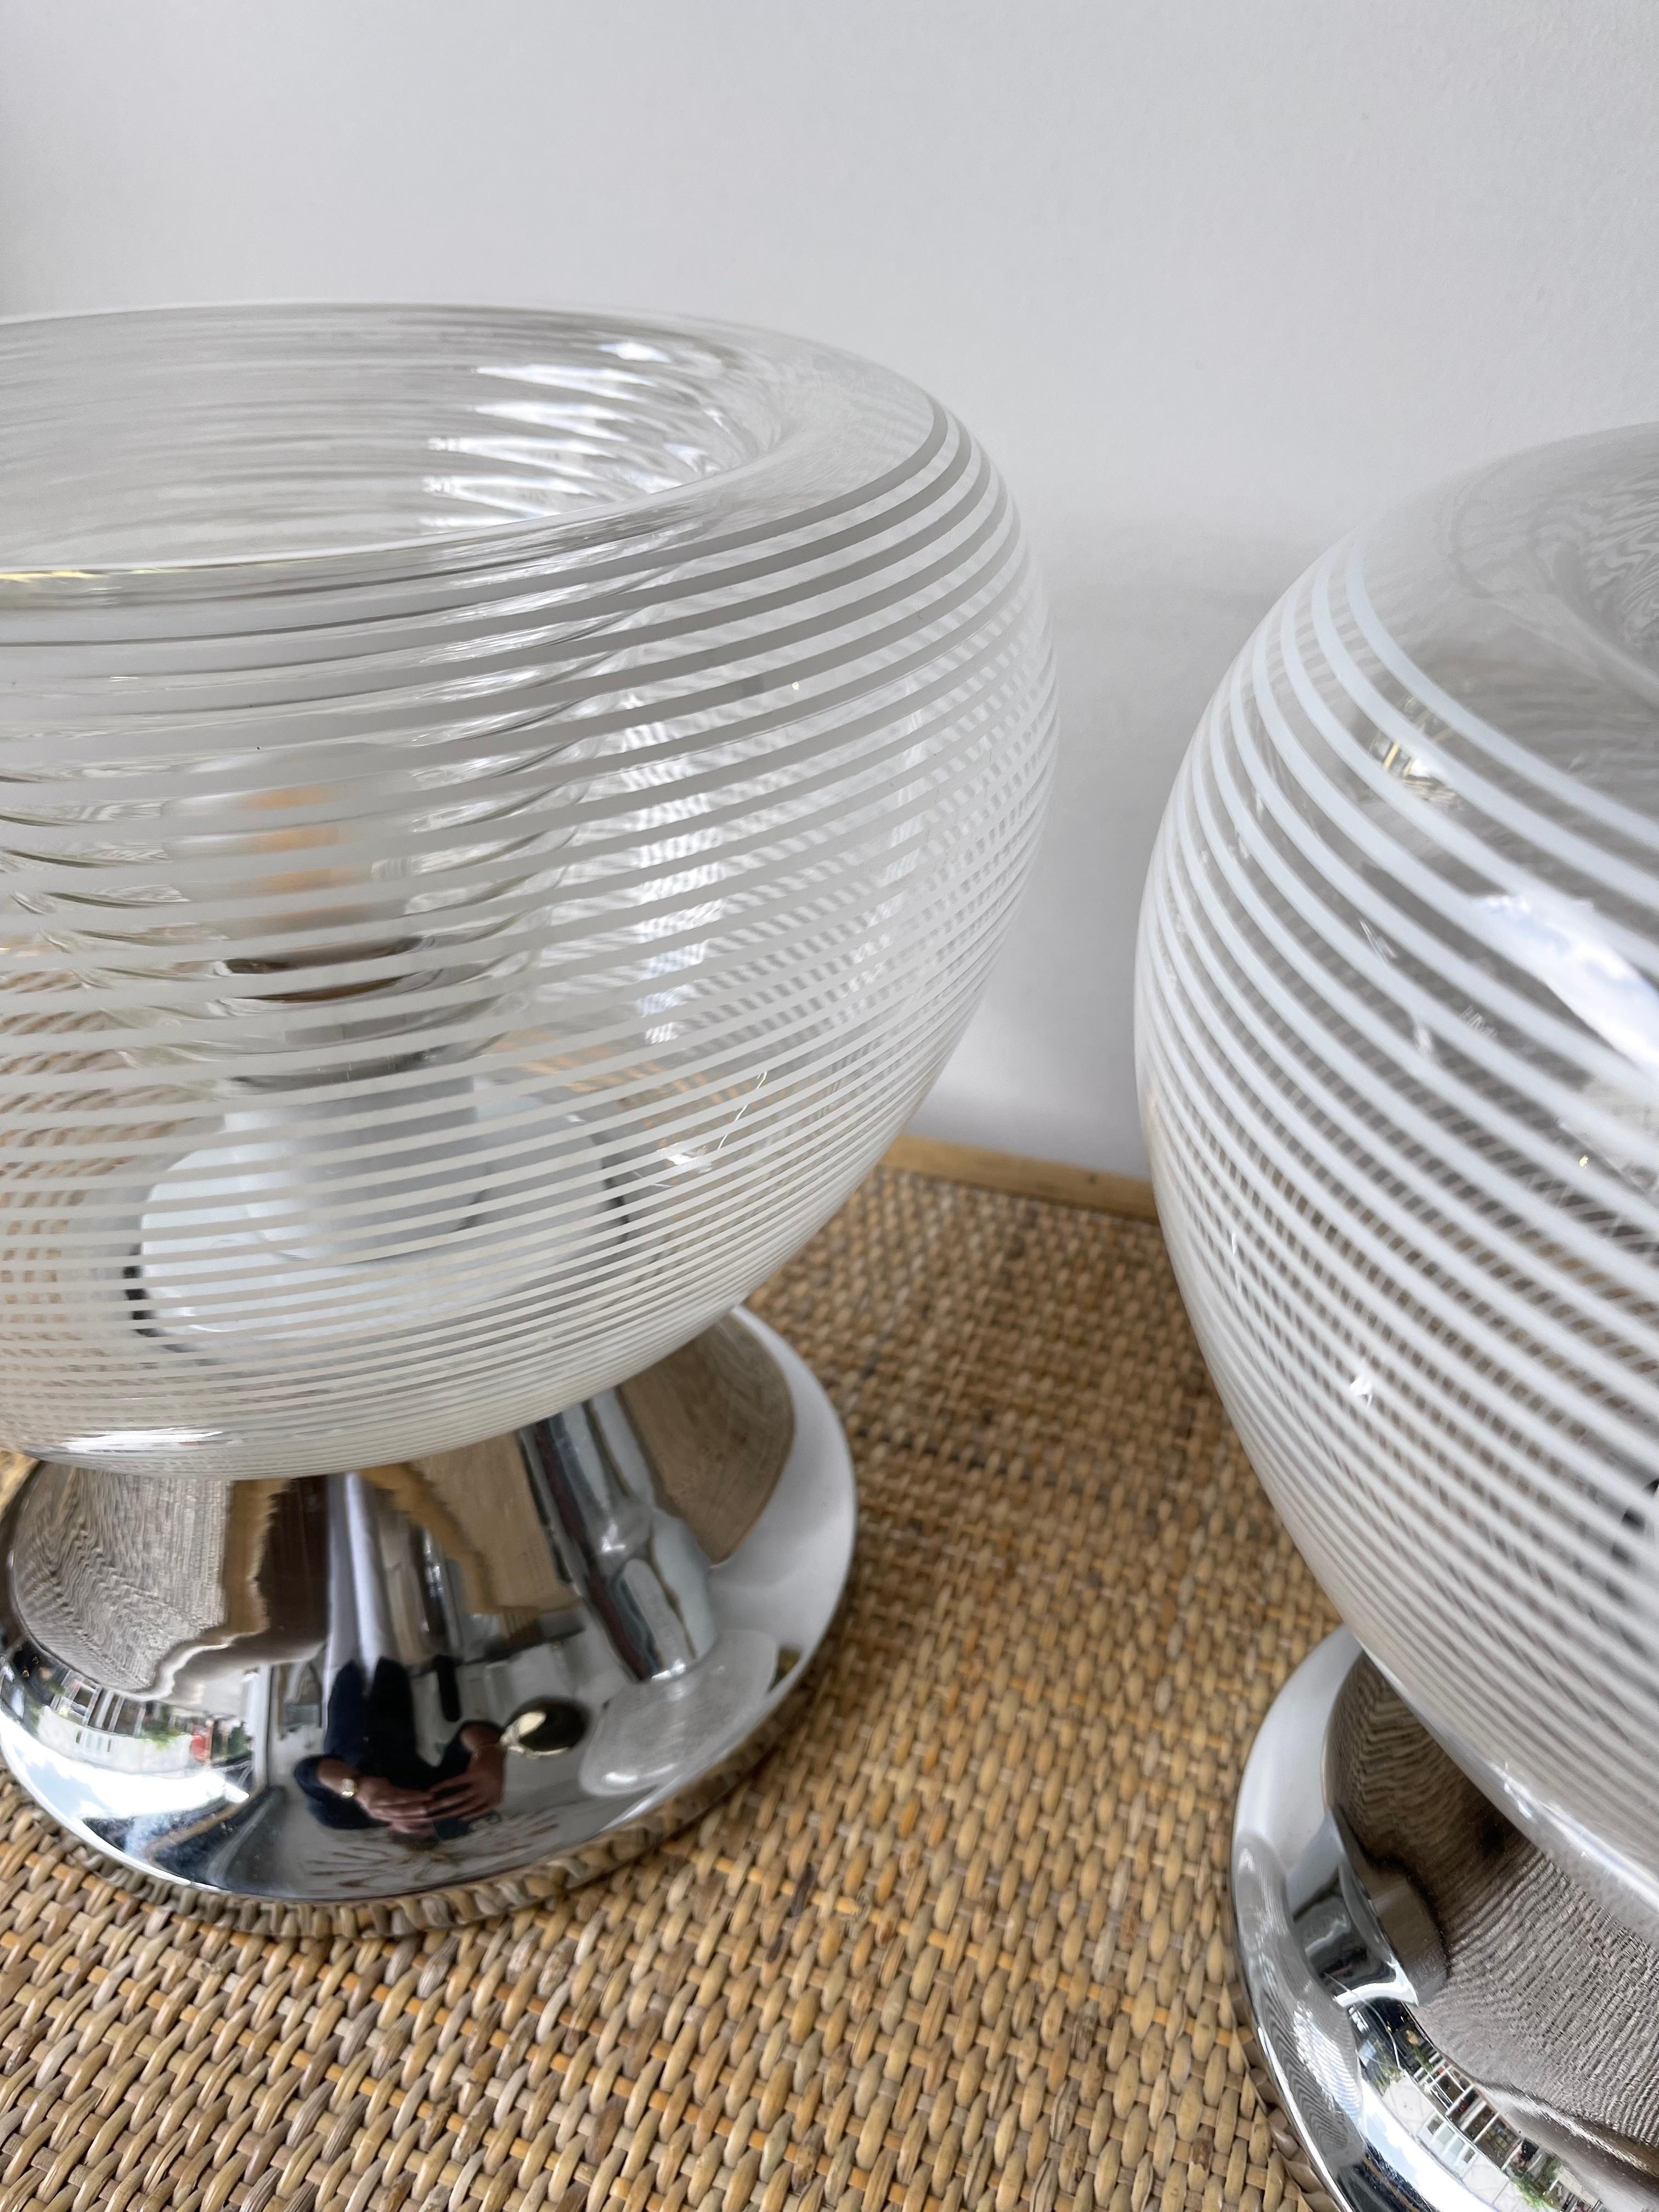 Pair of Stripe Murano Glass and Metal Chrome Lamps by VeArt, Italy, 1970s For Sale 2